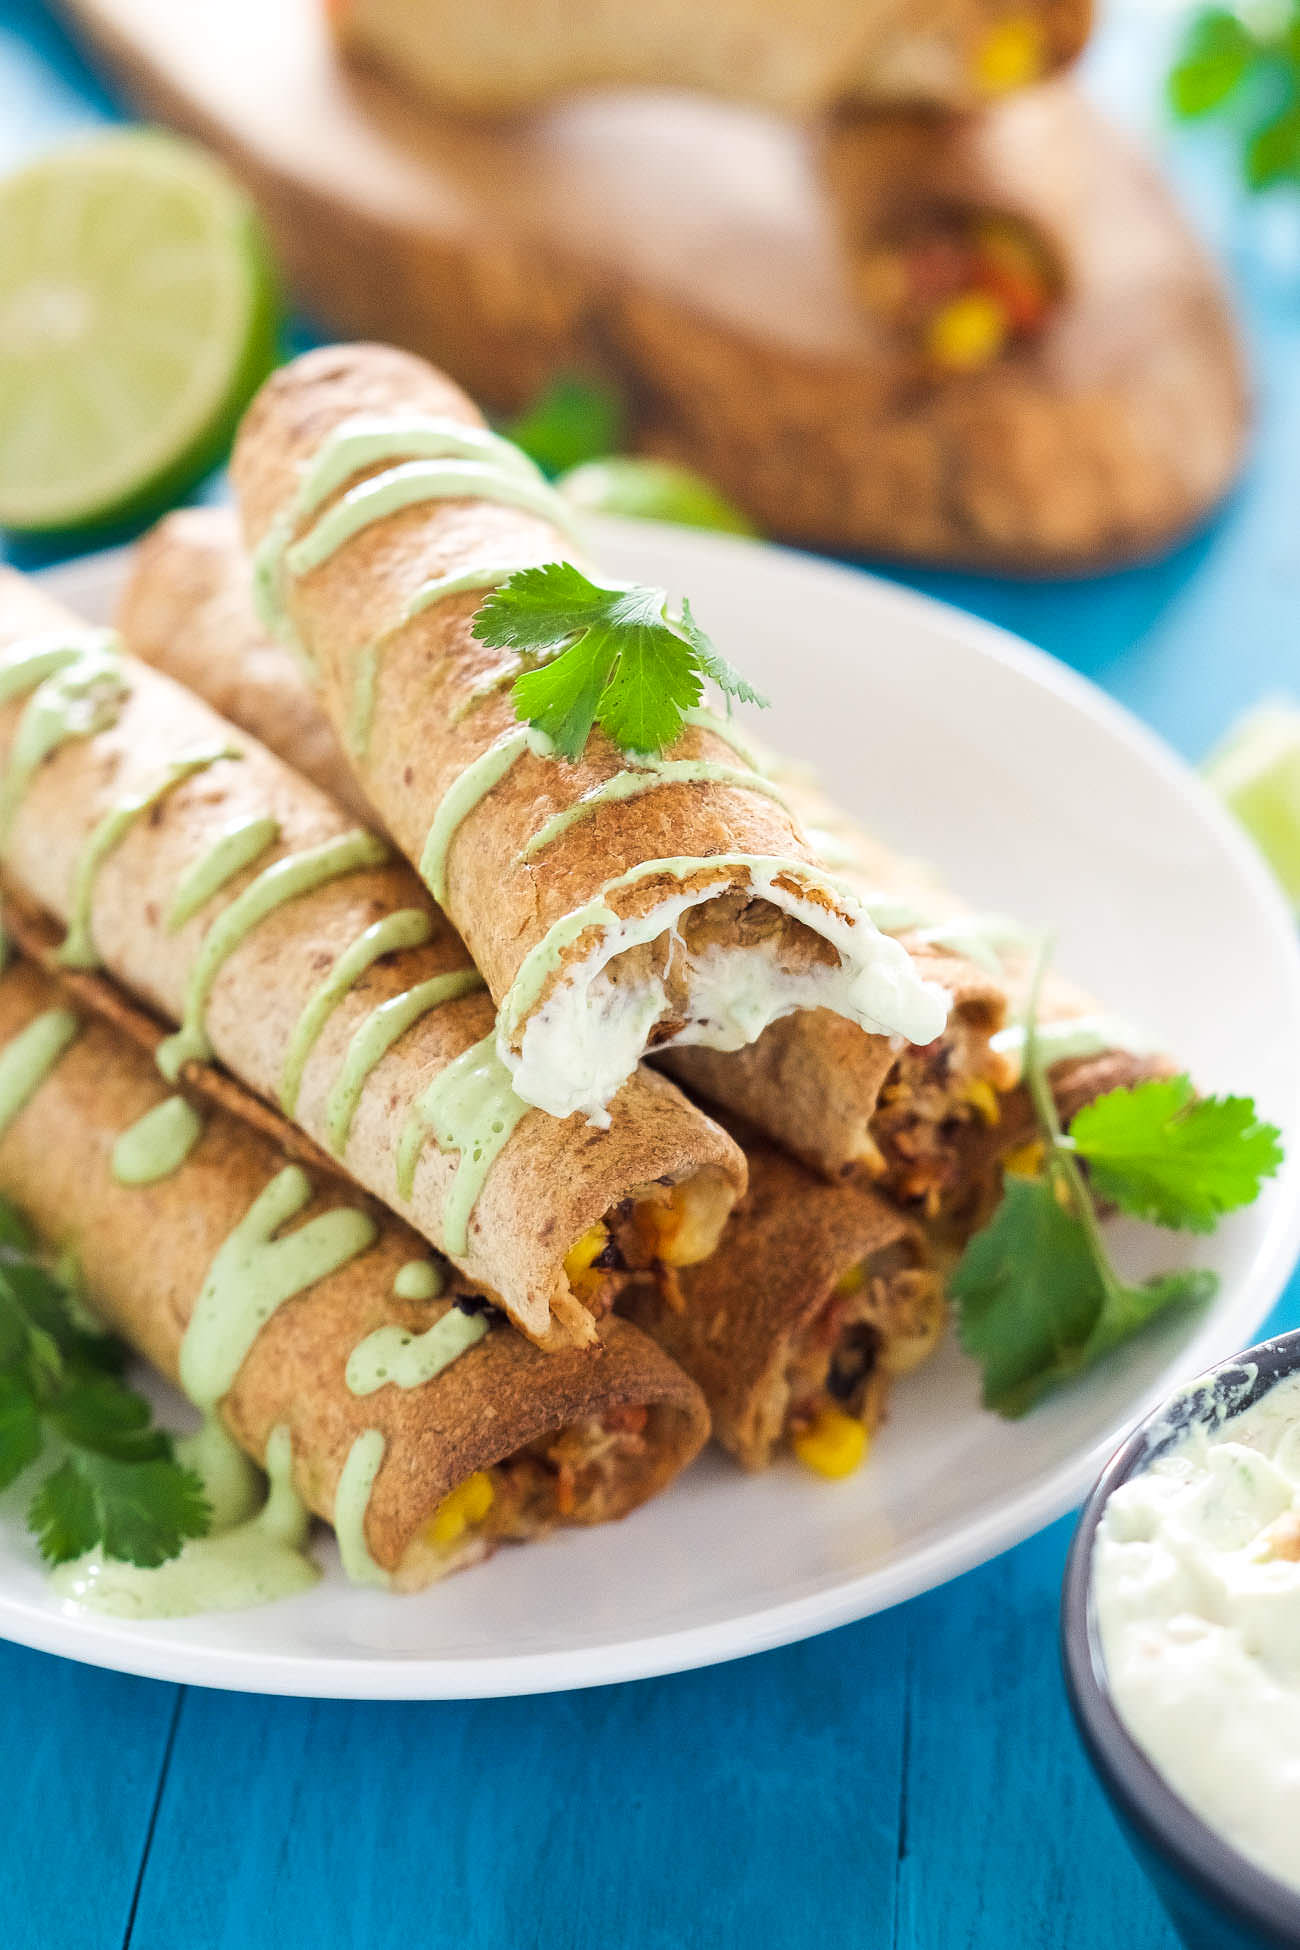 Cheesy Firecracker Baked Chicken Taquitos are a healthier alternative to their store bought sidekicks! Filled with gooey, spicy cheese, corn, chicken and peppers, they are super crispy thanks to a quick bake in the oven!